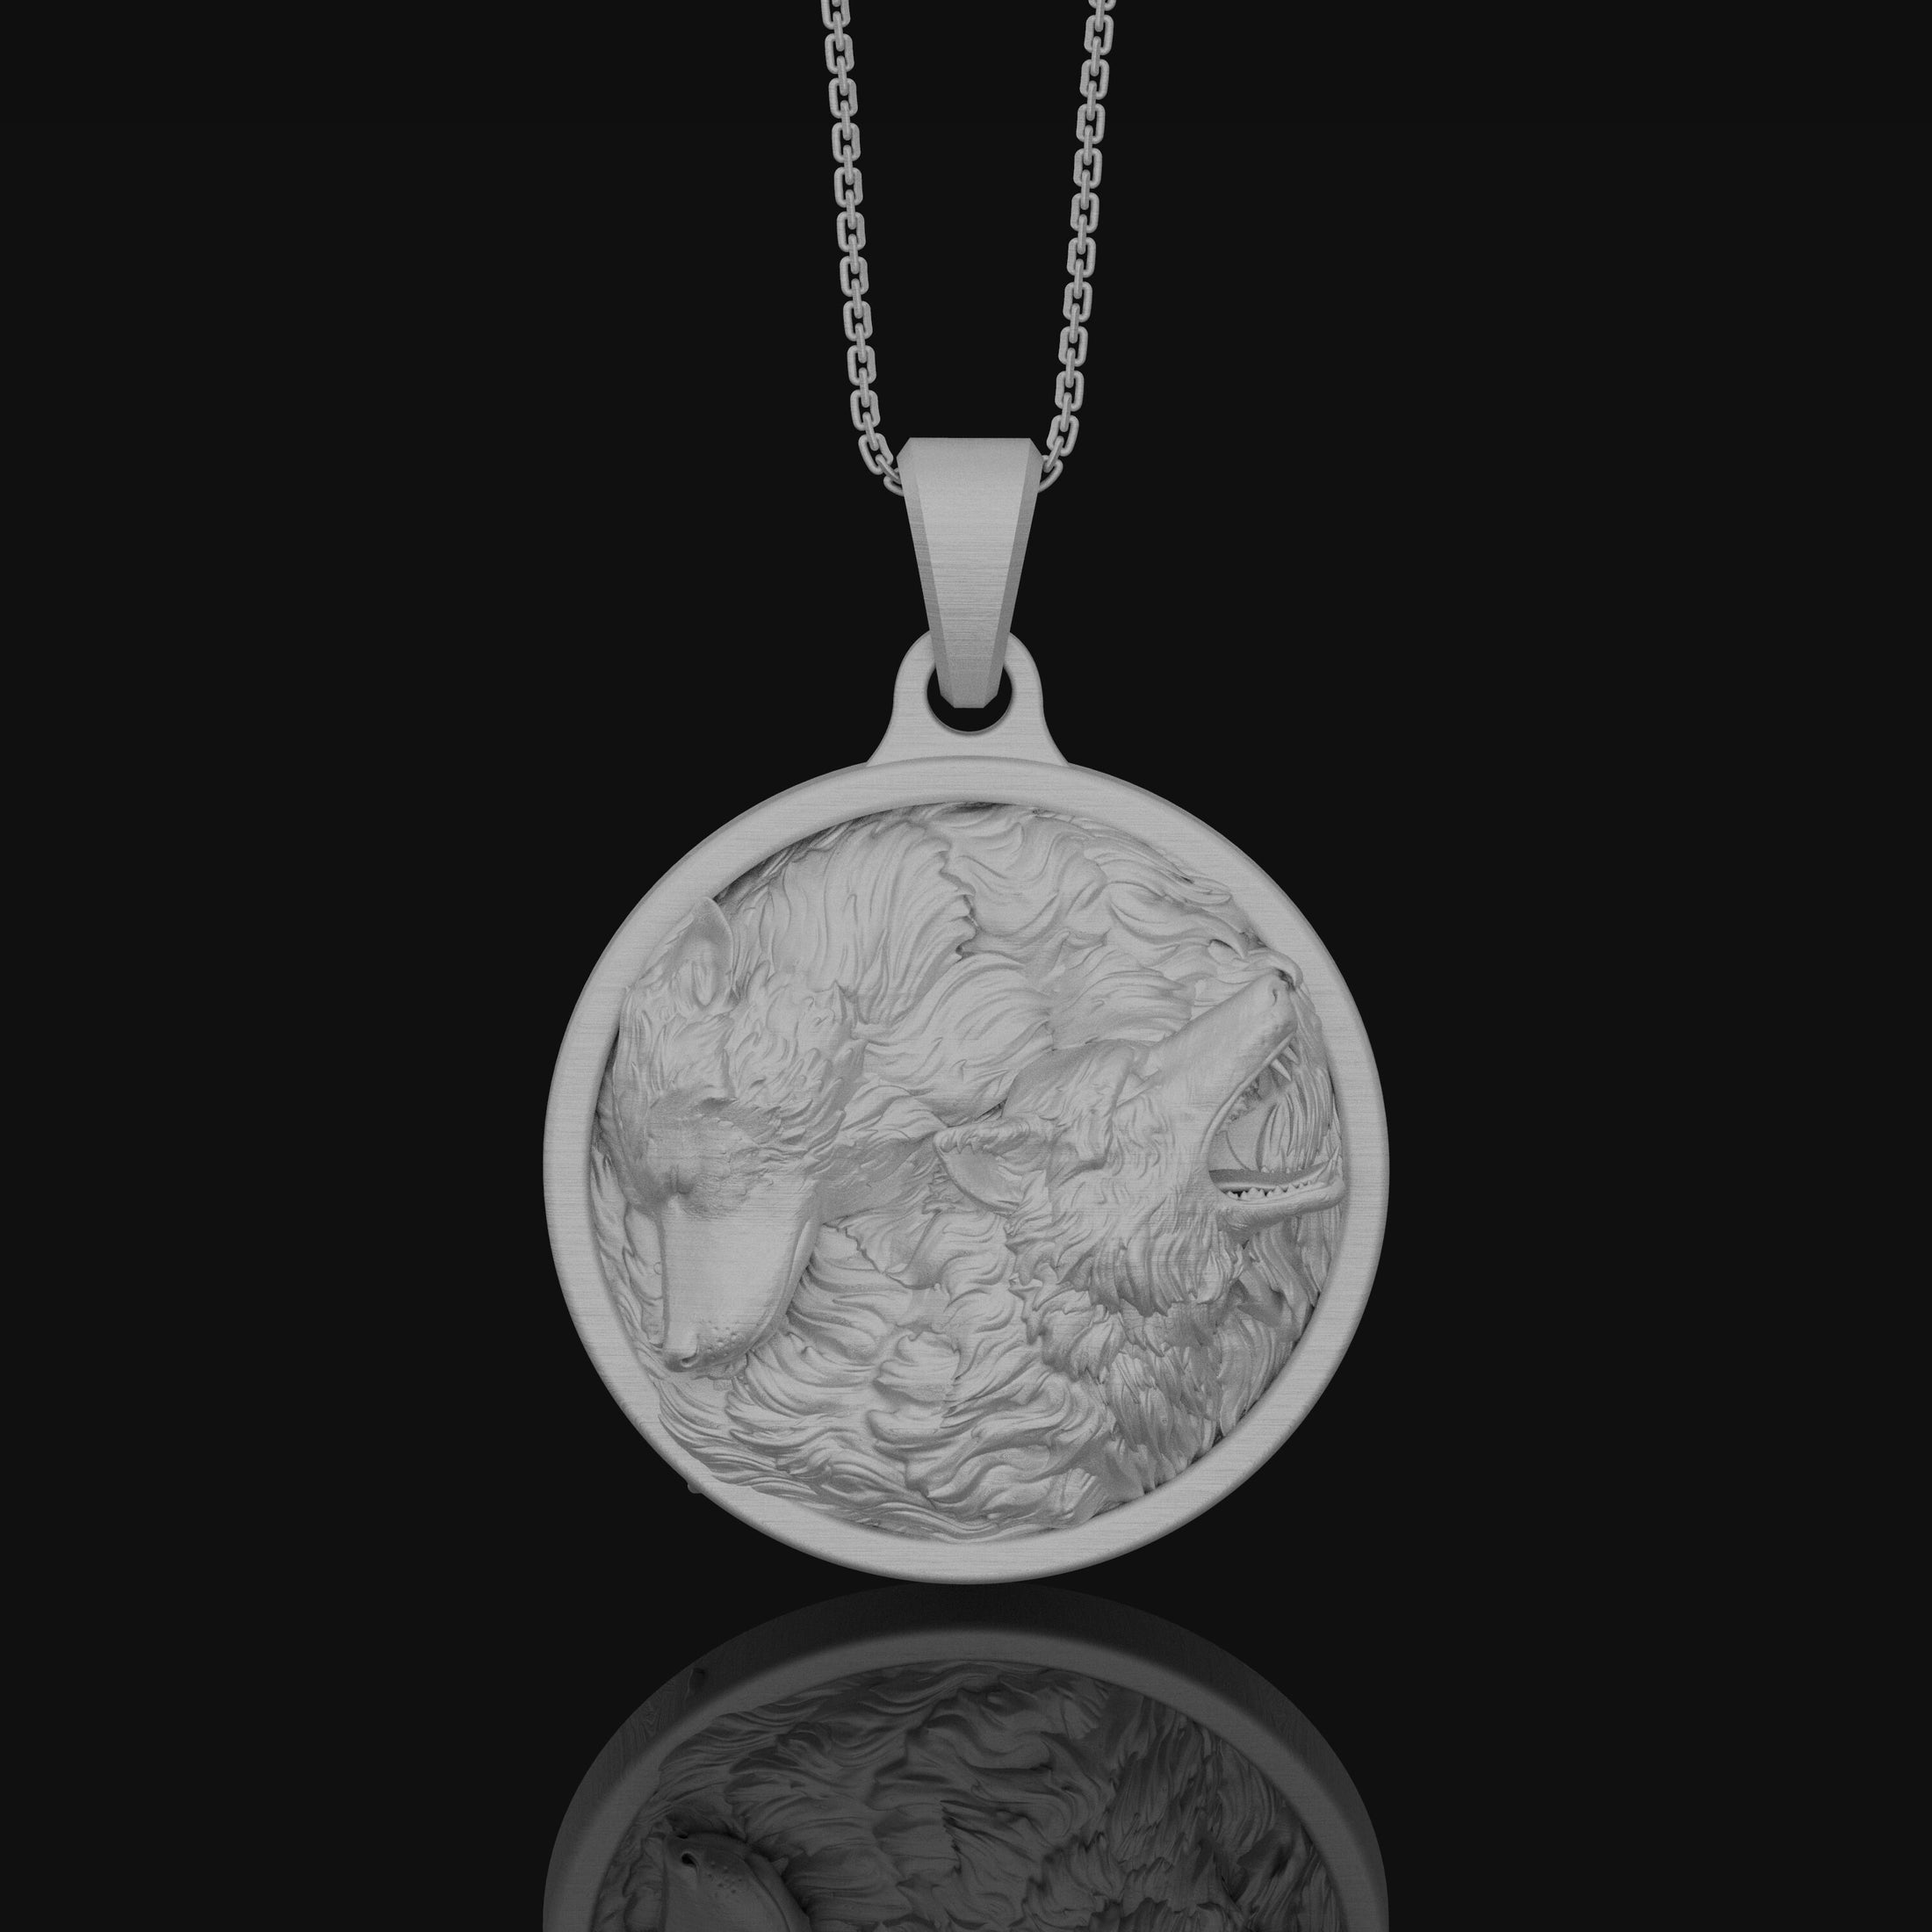 Twin Wolf Pendant Necklace - Silver Men's Wolfpack Jewelry, Alpha Wolves Spirit, Wild Canine Duo Charm, Perfect Gift for Him